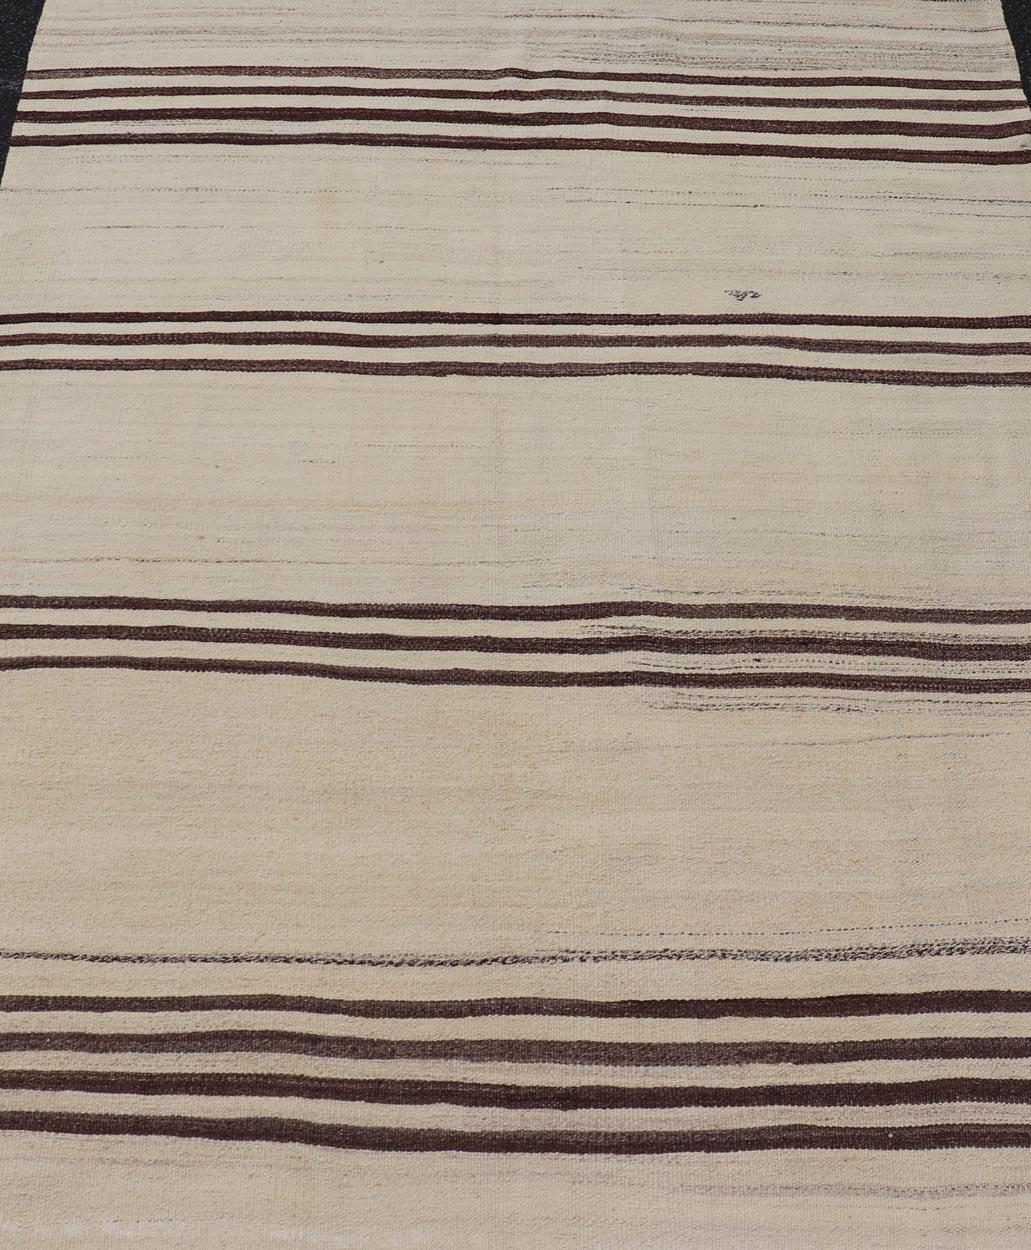 Turkish Vintage Flat-Weave in Brown and Cream with Stripe Design. Keivan Woven Arts / rug EN-14904, country of origin / type: Turkey / Kilim, circa 1950
Measures: 4'11 x 6'4 
This vintage striped design Turkish Kilim rendered in shade of browns, and